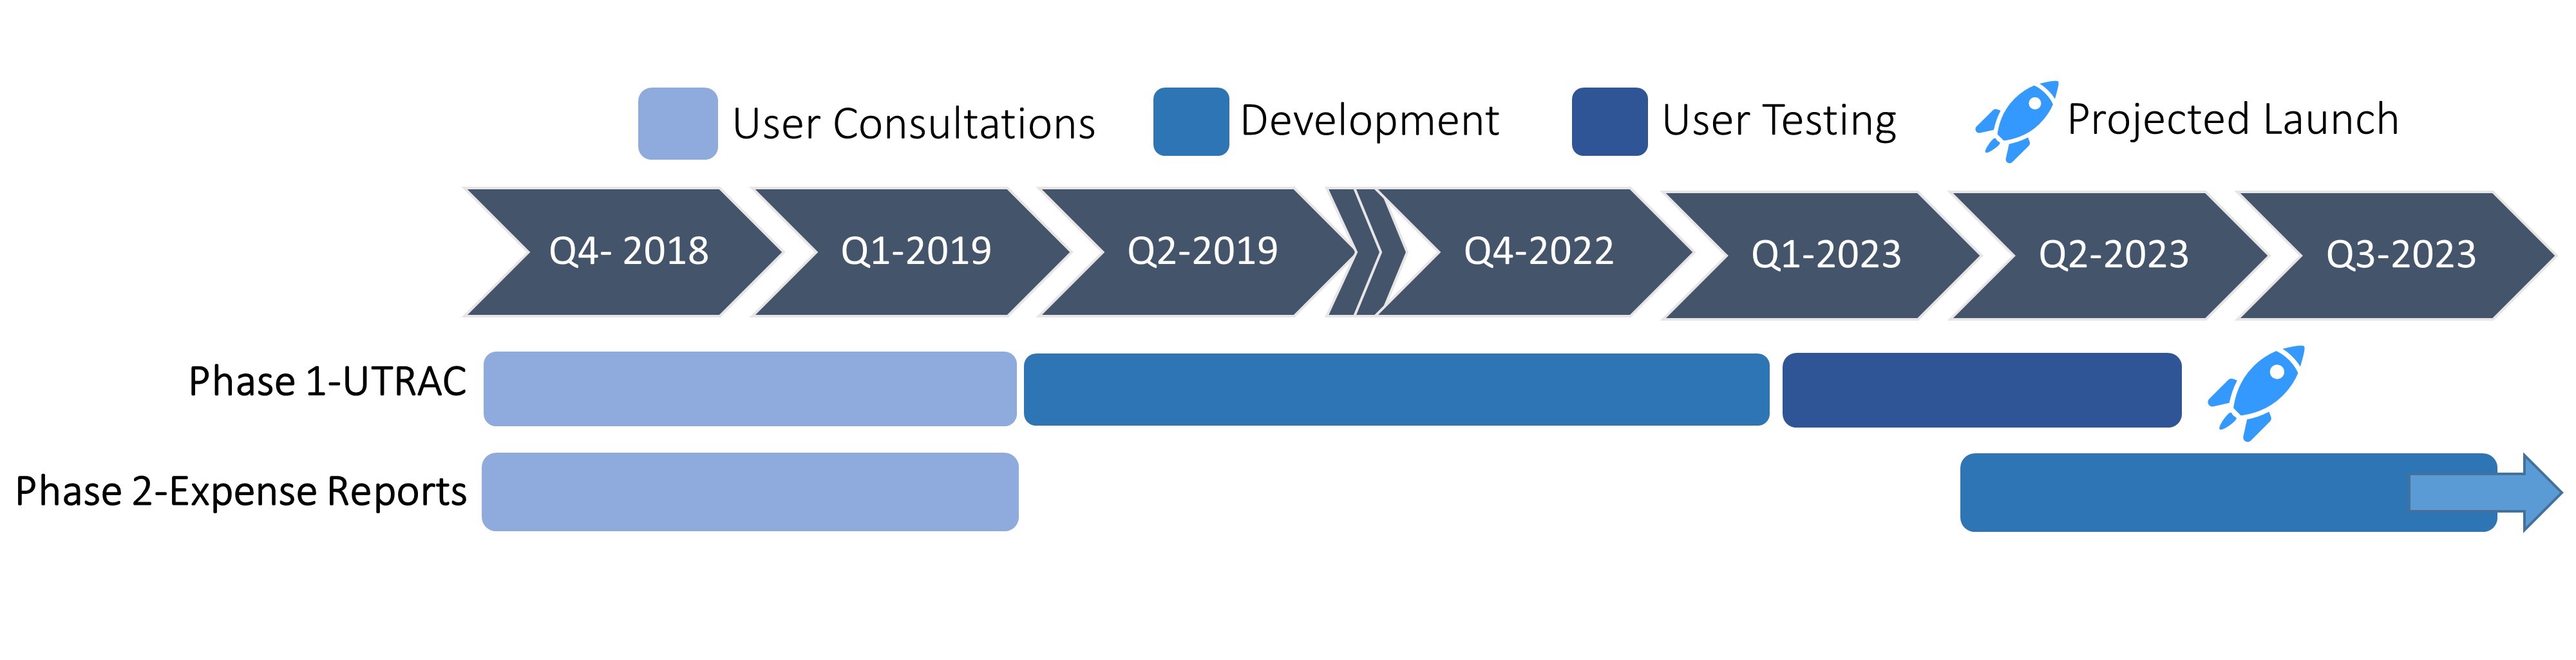 (Phase 1) UTRAC’s user consultations were between October 2018 and March 2019, development will be taking place between April 2019 and January 2023, user testing will be taking place during the second and third quarter of 2023. The projected launch date is in the third quarter of 2023. (Phase 2) Financial report’s user consultations were between October 2018 and March 2019; development will begin in July 2022 and continue through 2023.